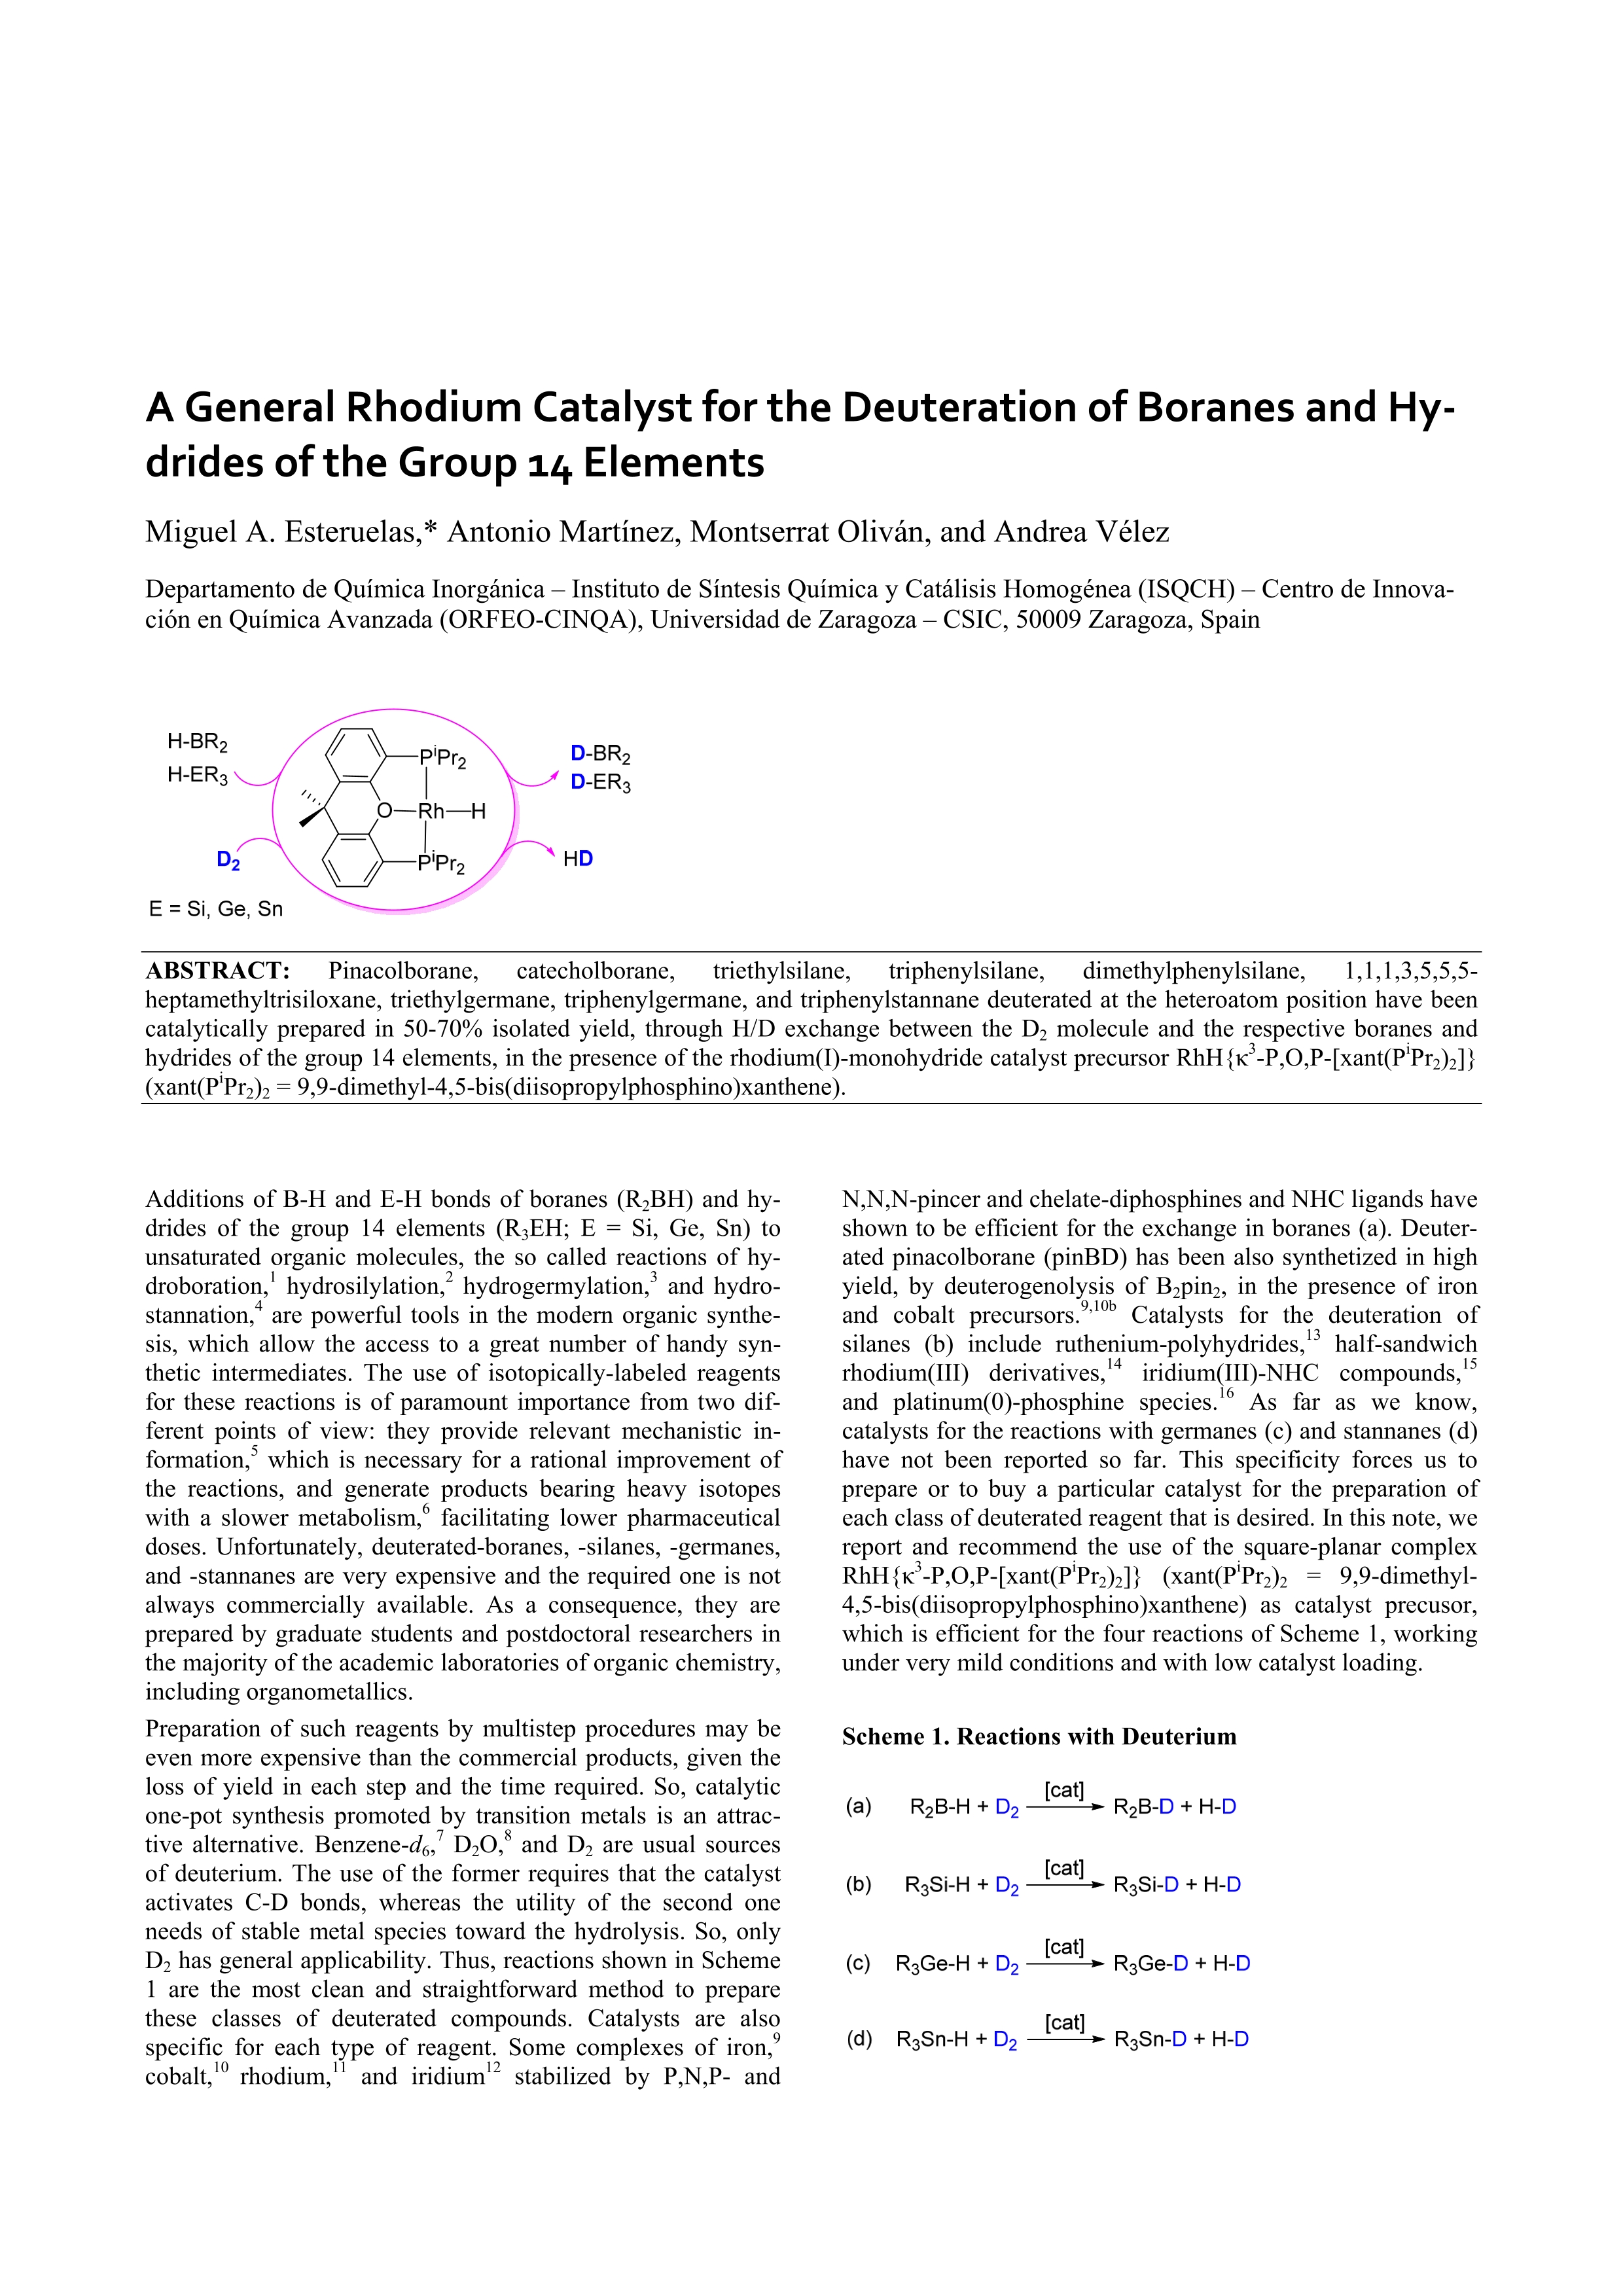 A General Rhodium Catalyst for the Deuteration of Boranes and Hydrides of the Group 14 Elements